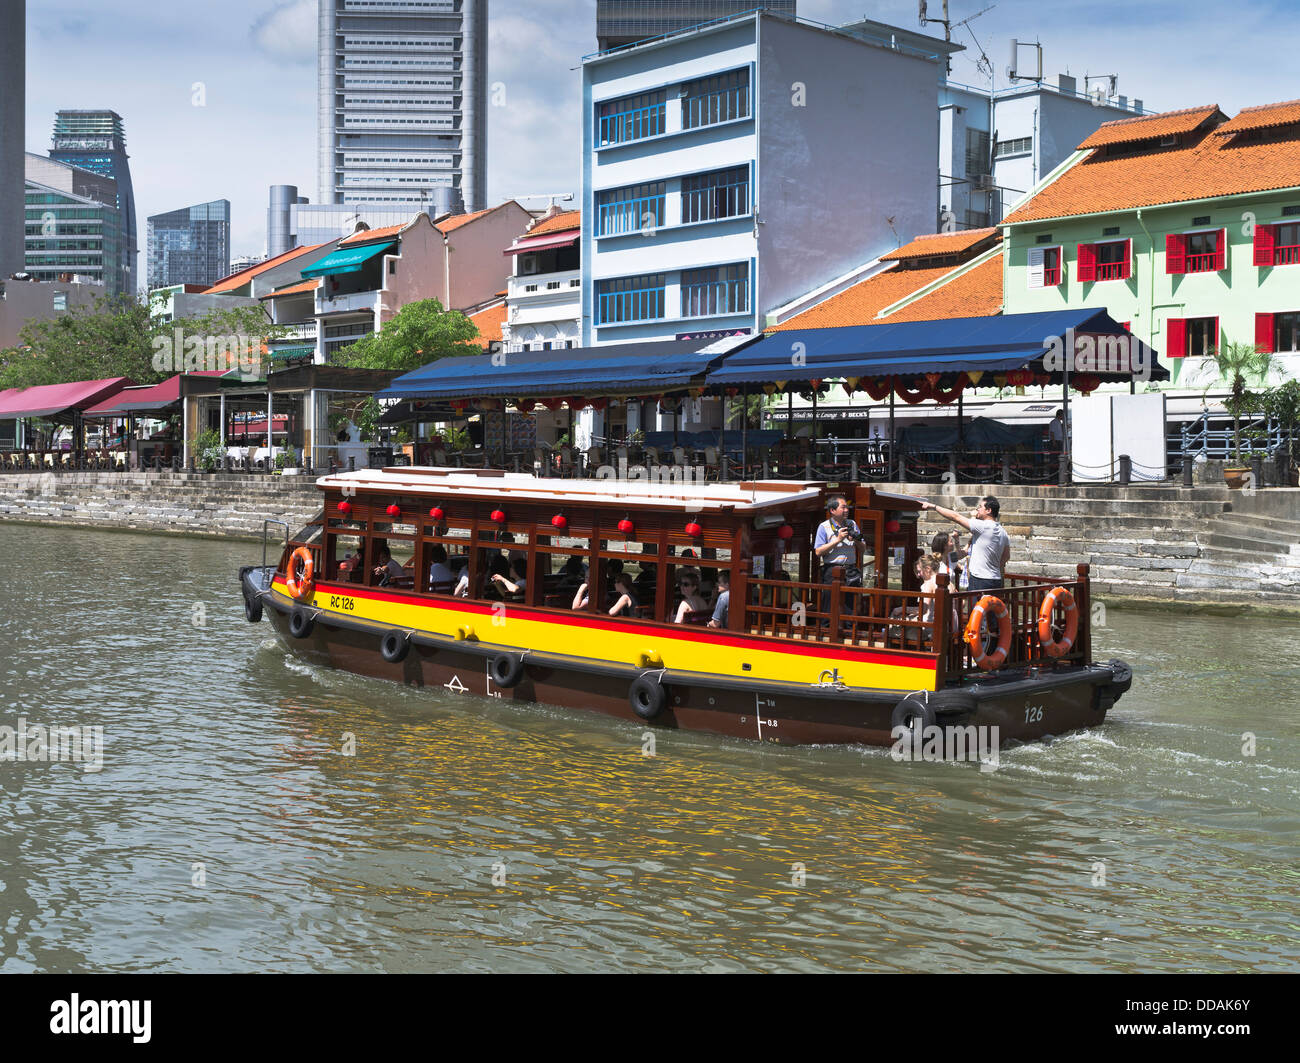 dh Singapore River BOAT QUAY SINGAPORE Tourist Bumboat cruise tours Singapore water taxi boats waterfront tourism Stock Photo